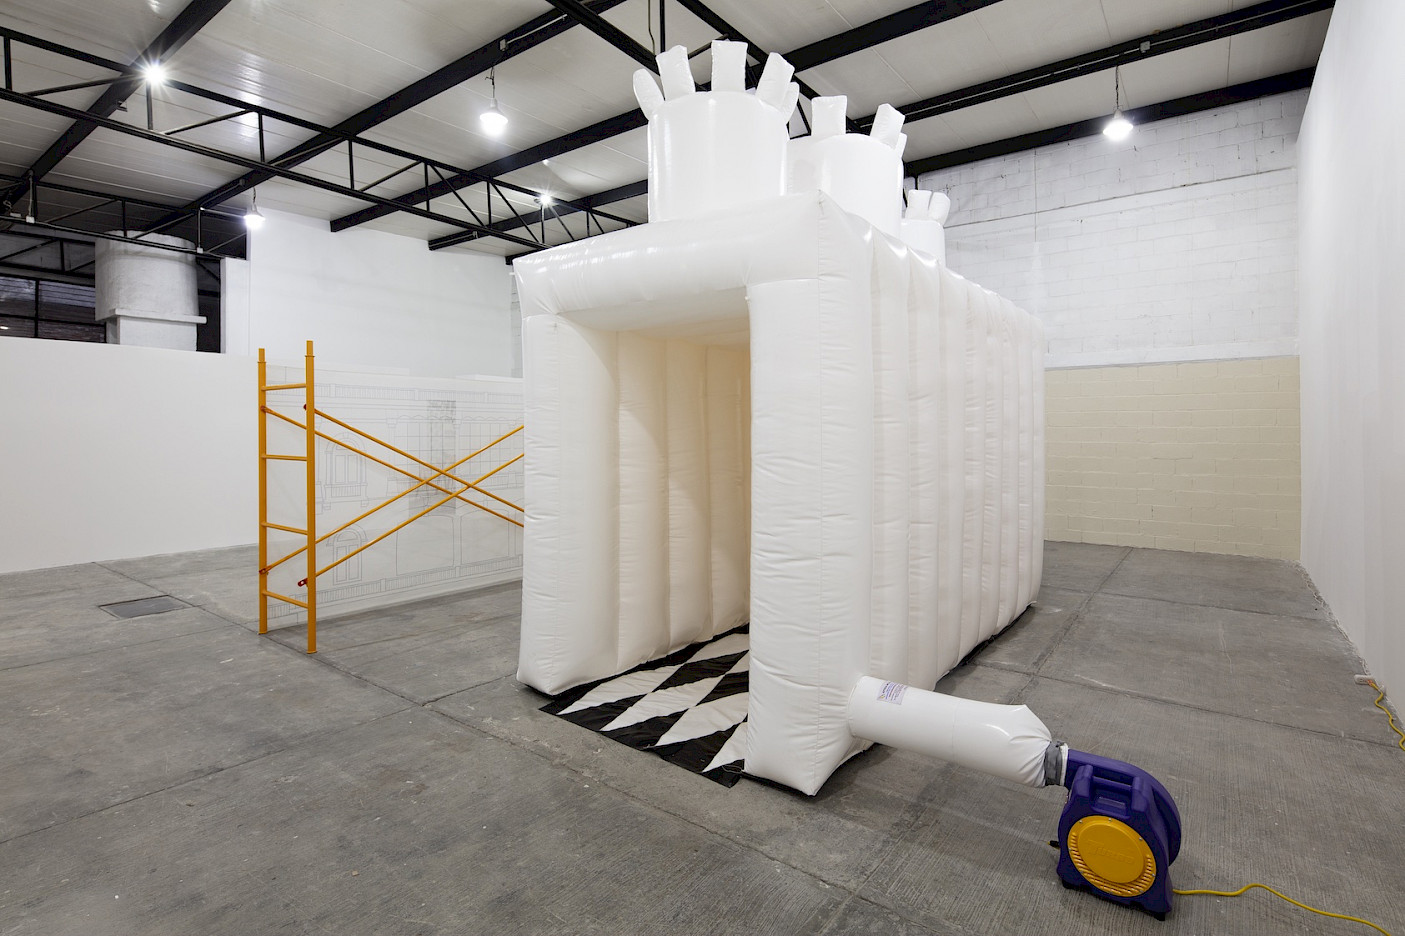 Image: Castles, installation view 2023, Llano, Mexico City, Mexico. Image courtesy of the artist and Llano. Photographer: Ramiro Chaves.